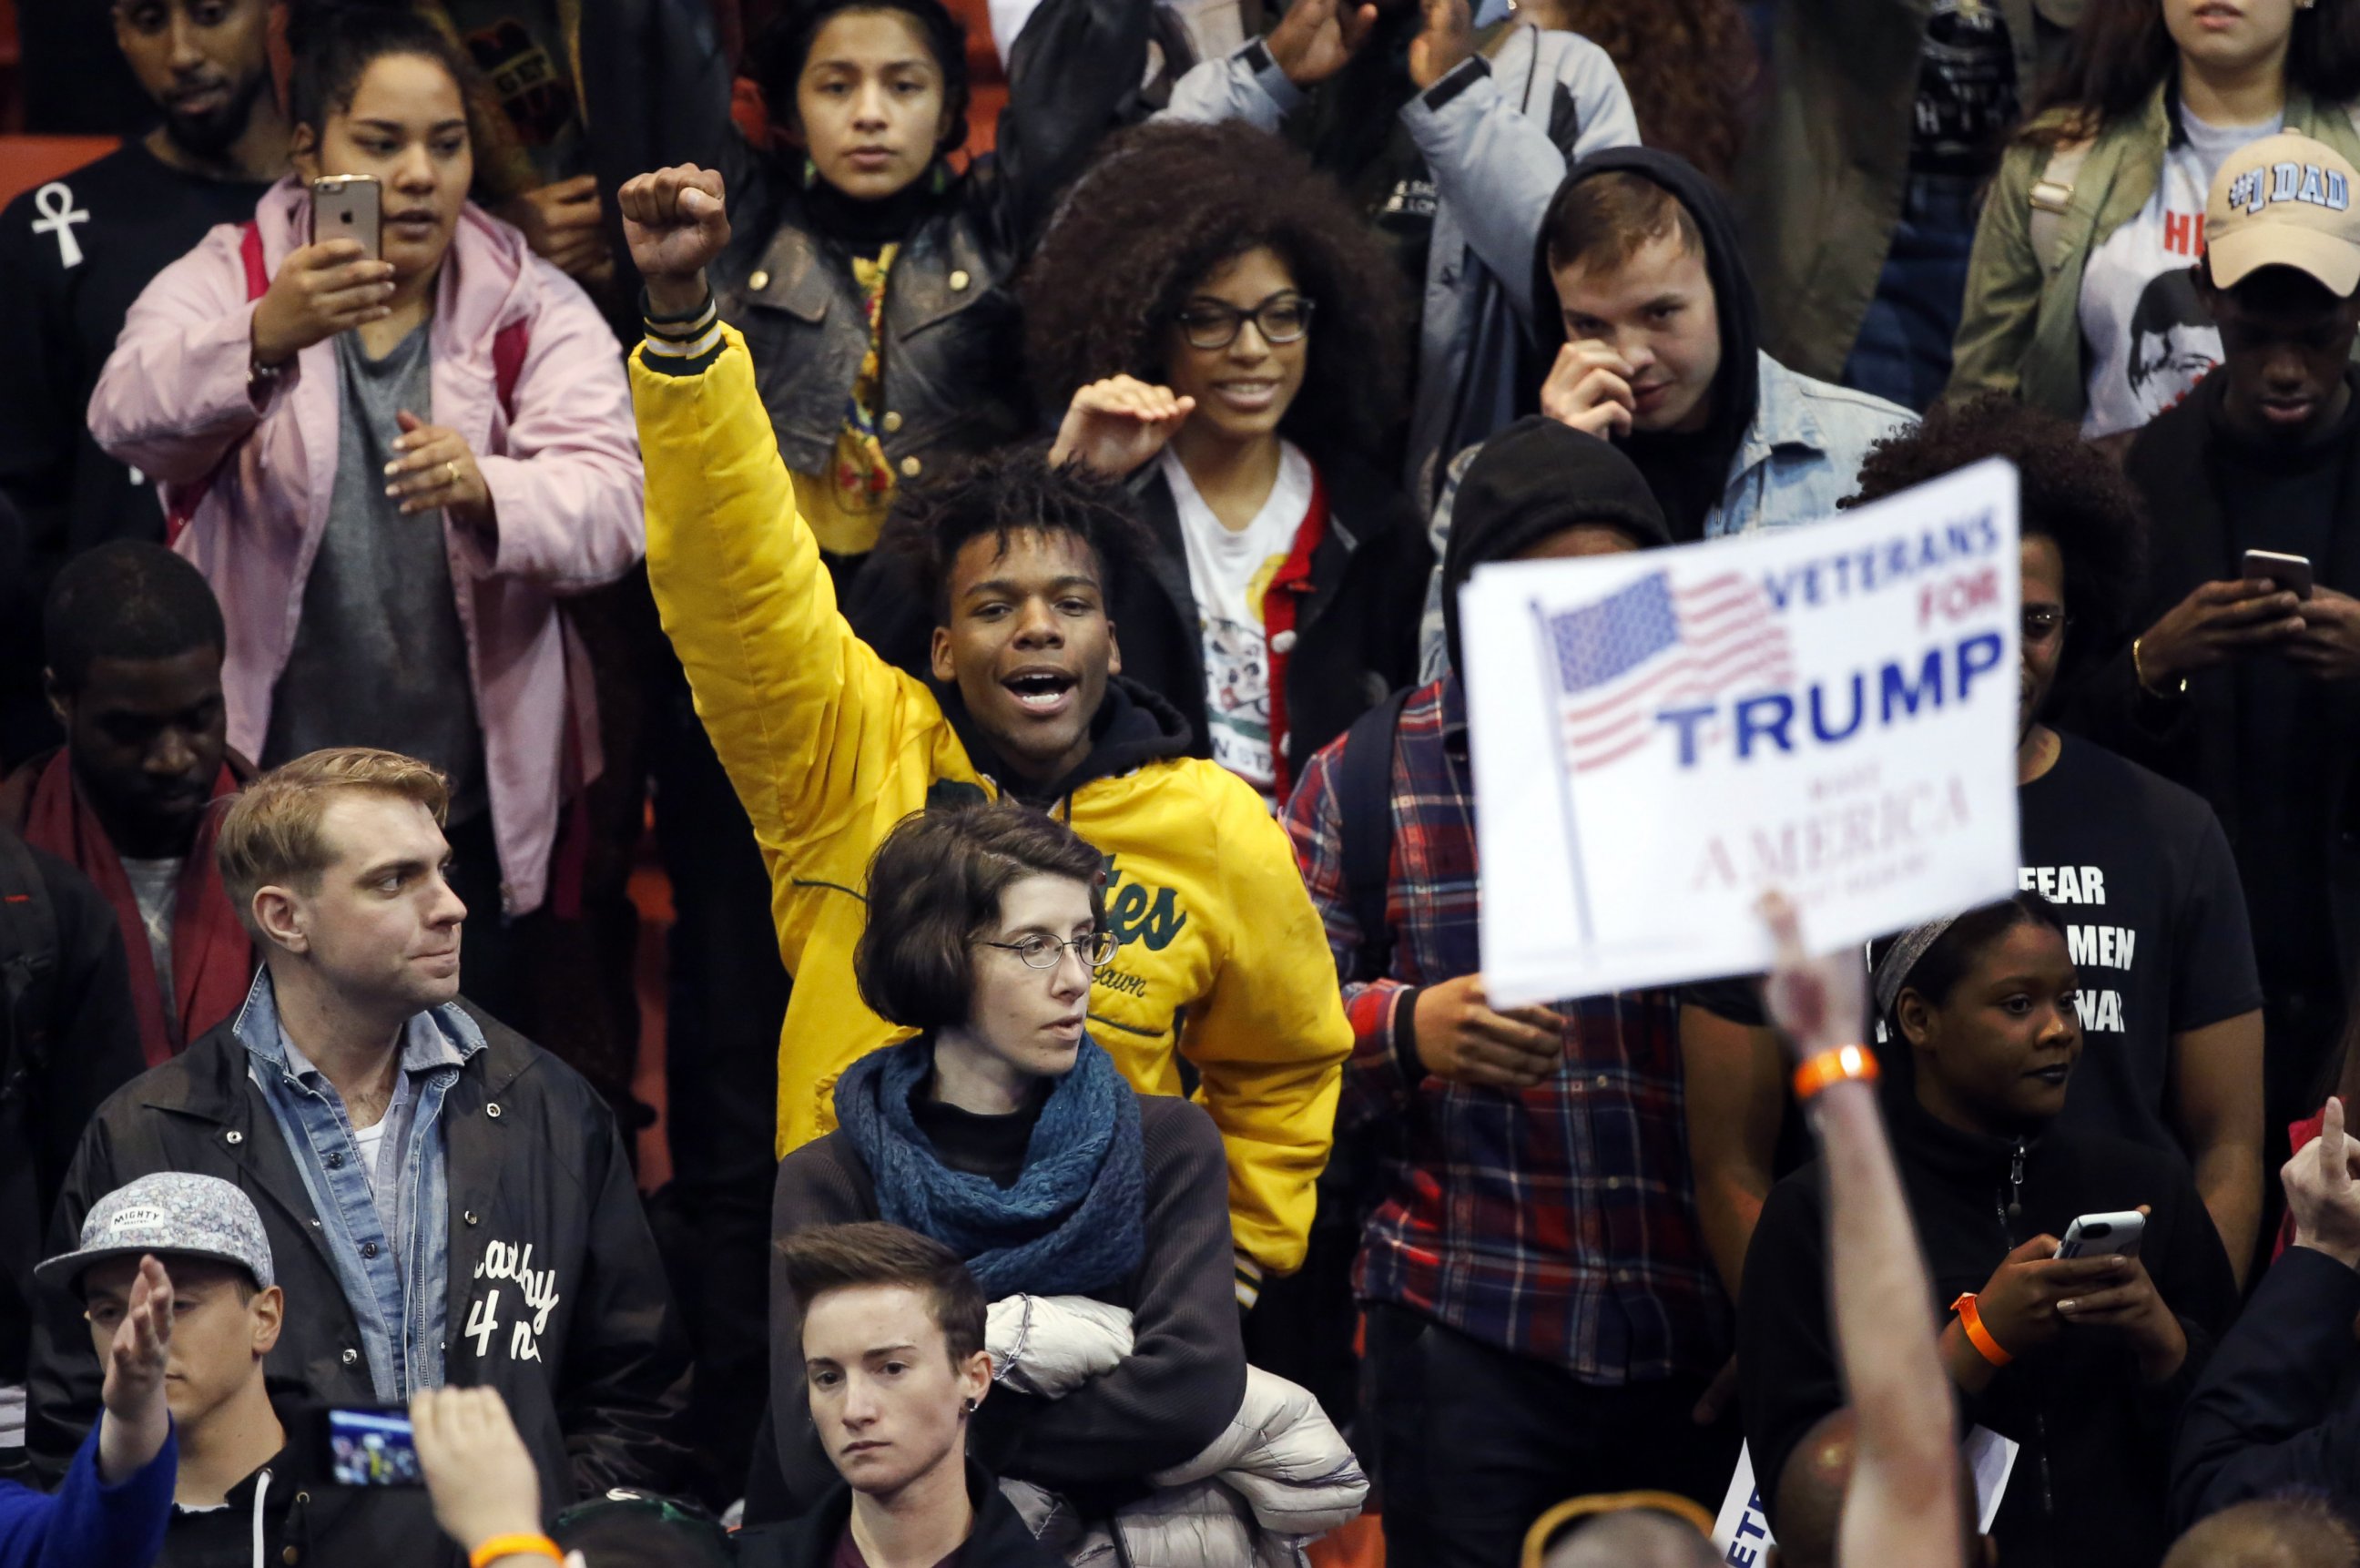 PHOTO: A protester raises his fist to supporters of Republican presidential candidate Donald Trump before a rally on the campus of the University of Illinois-Chicago, March 11, 2016, in Chicago.